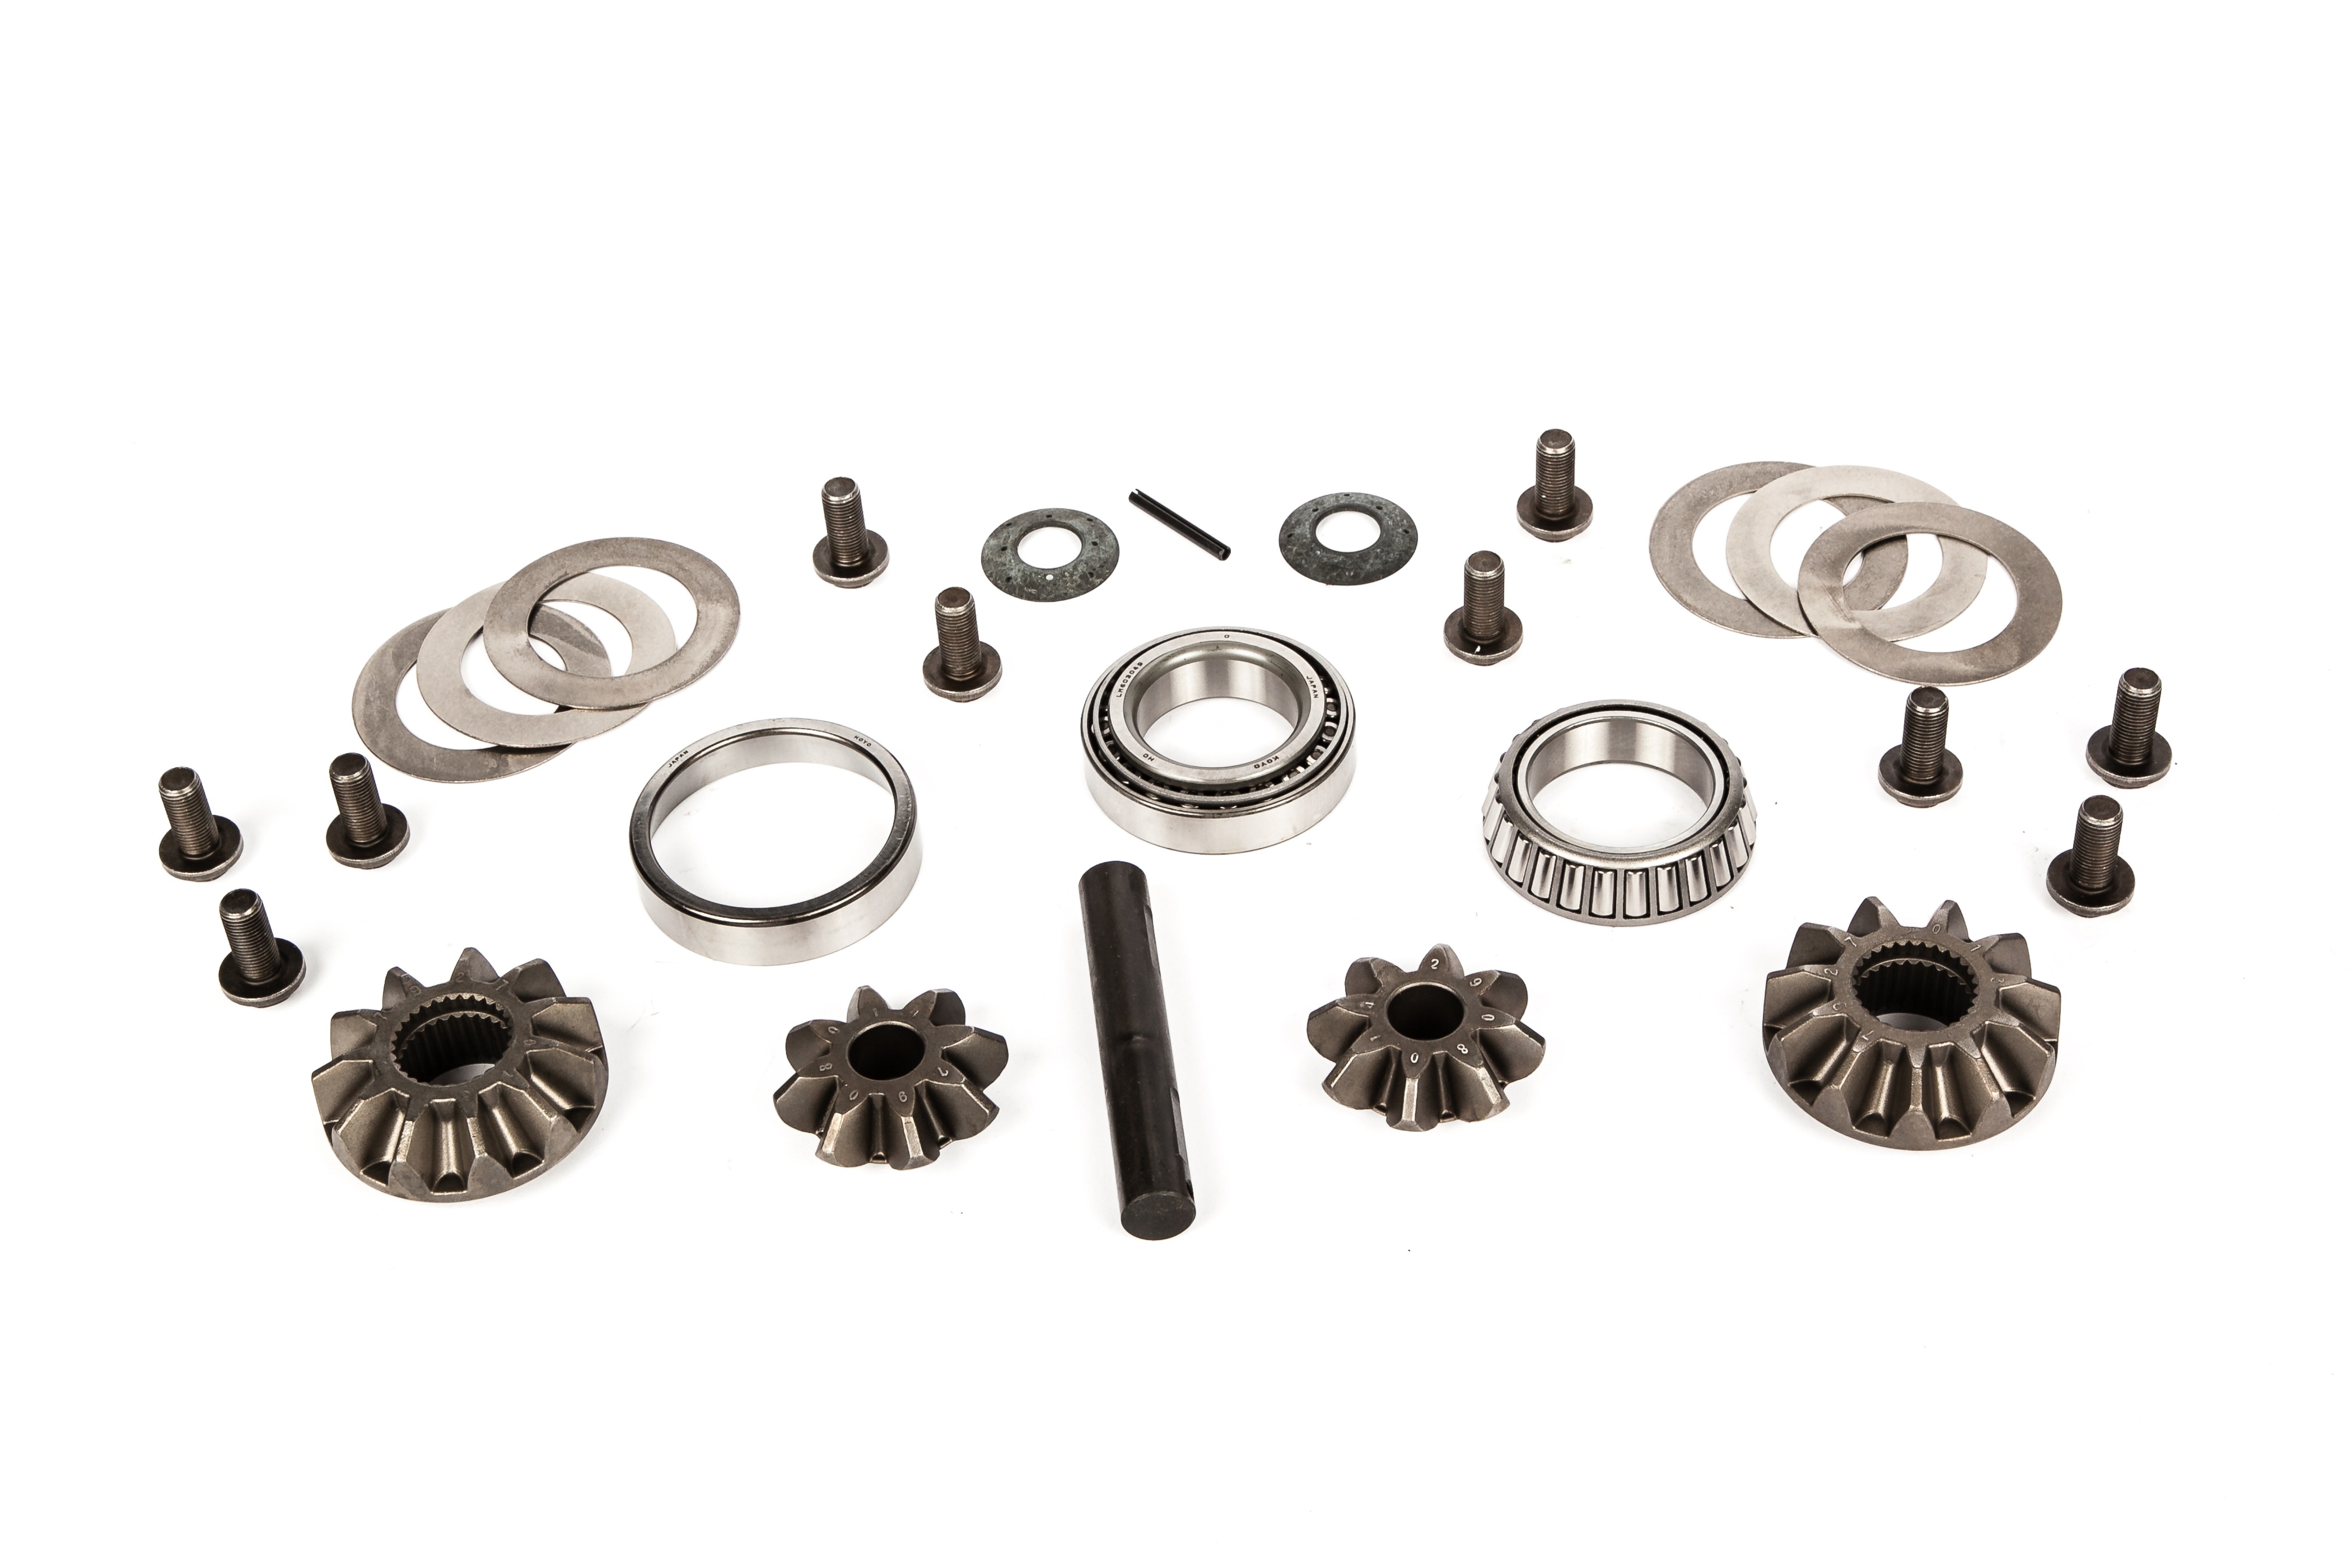 GM GENUINE PARTS - Differential Carrier Gear Kit - GMP 23471868